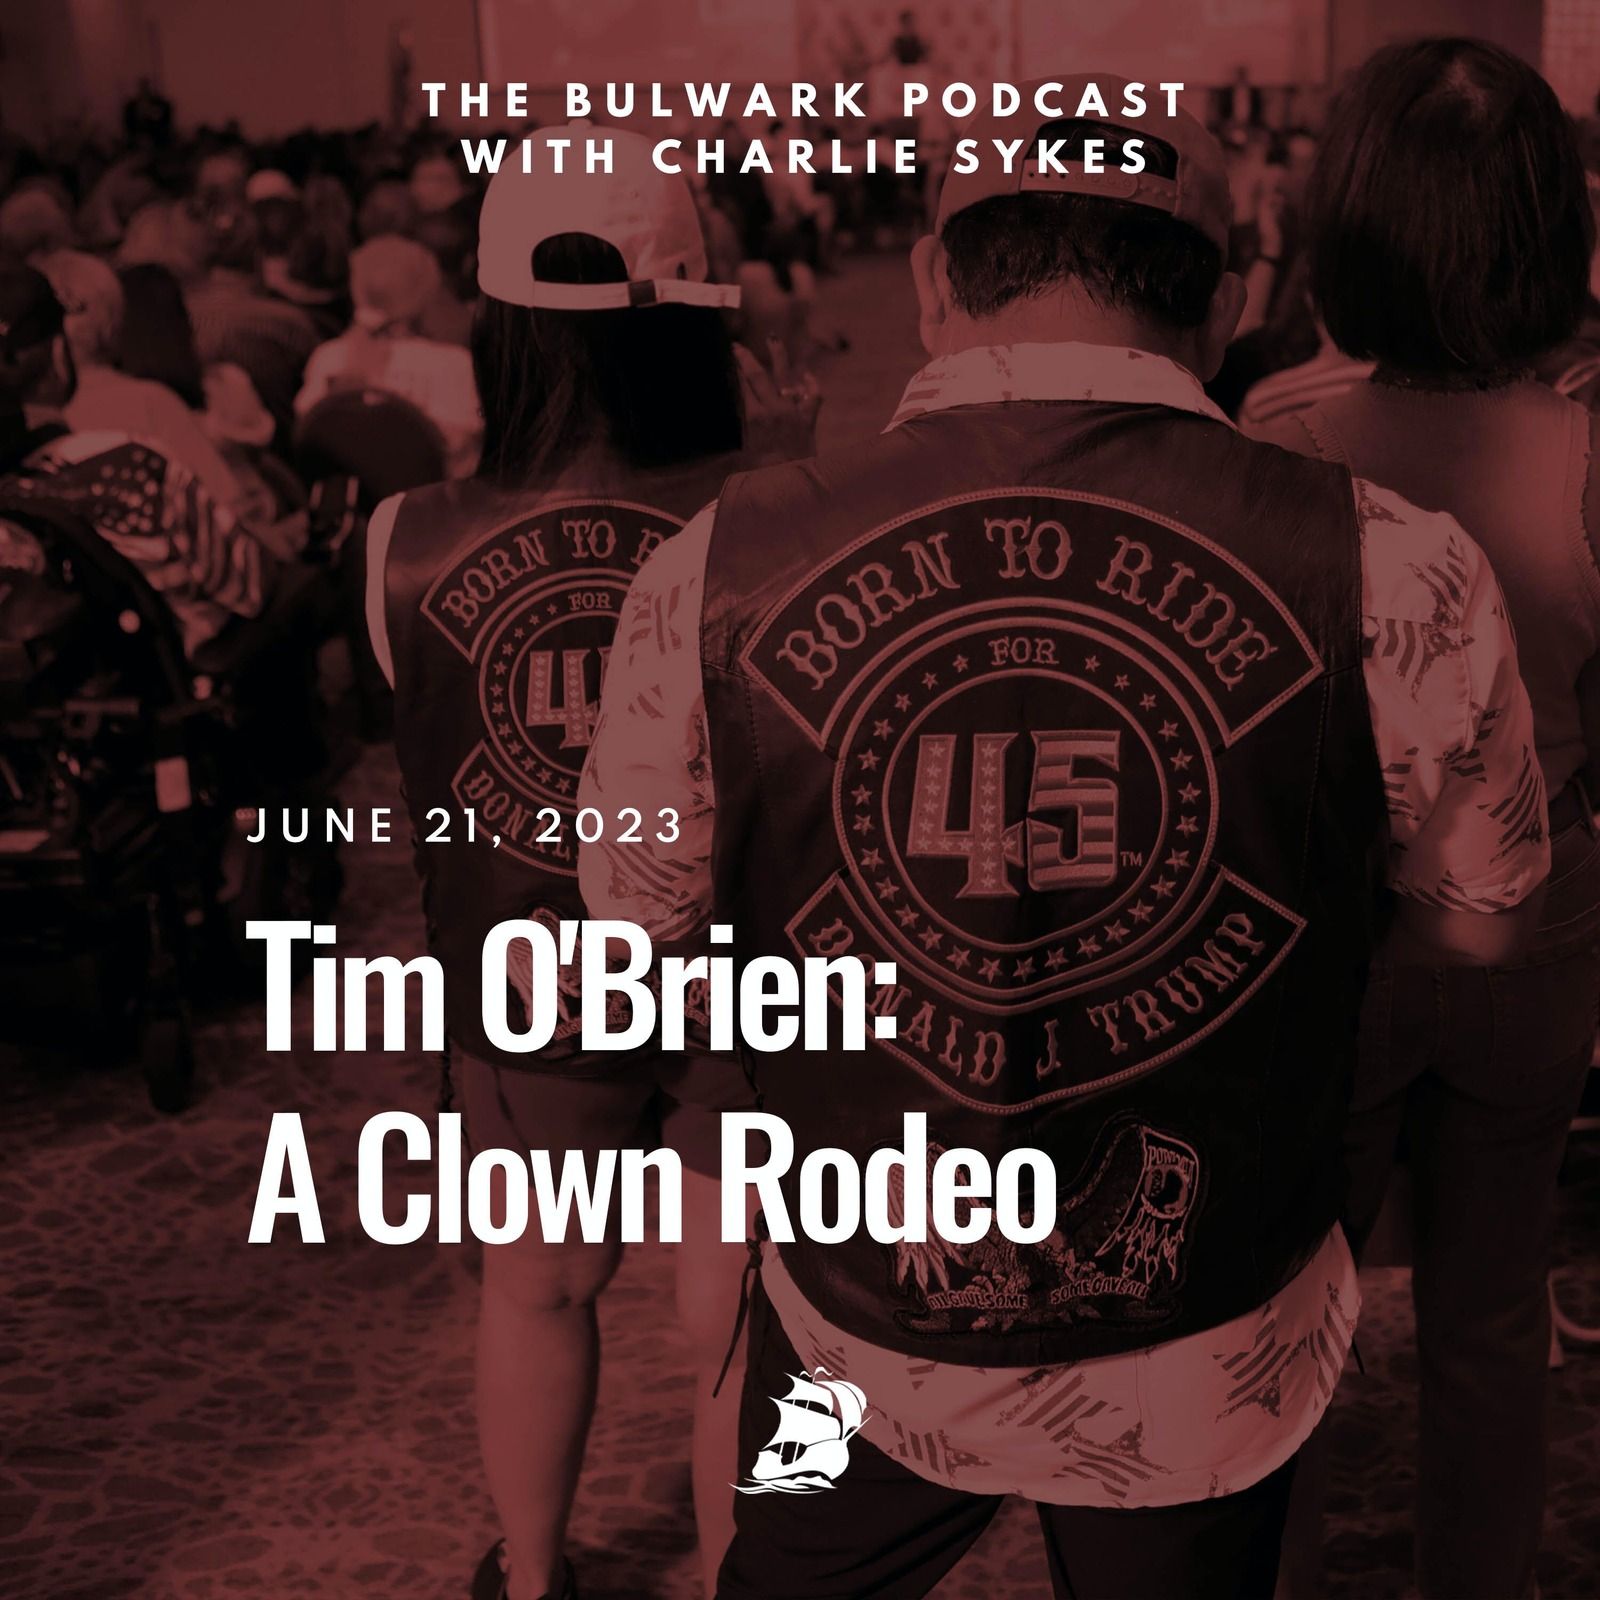 Tim O'Brien: A Clown Rodeo by The Bulwark Podcast